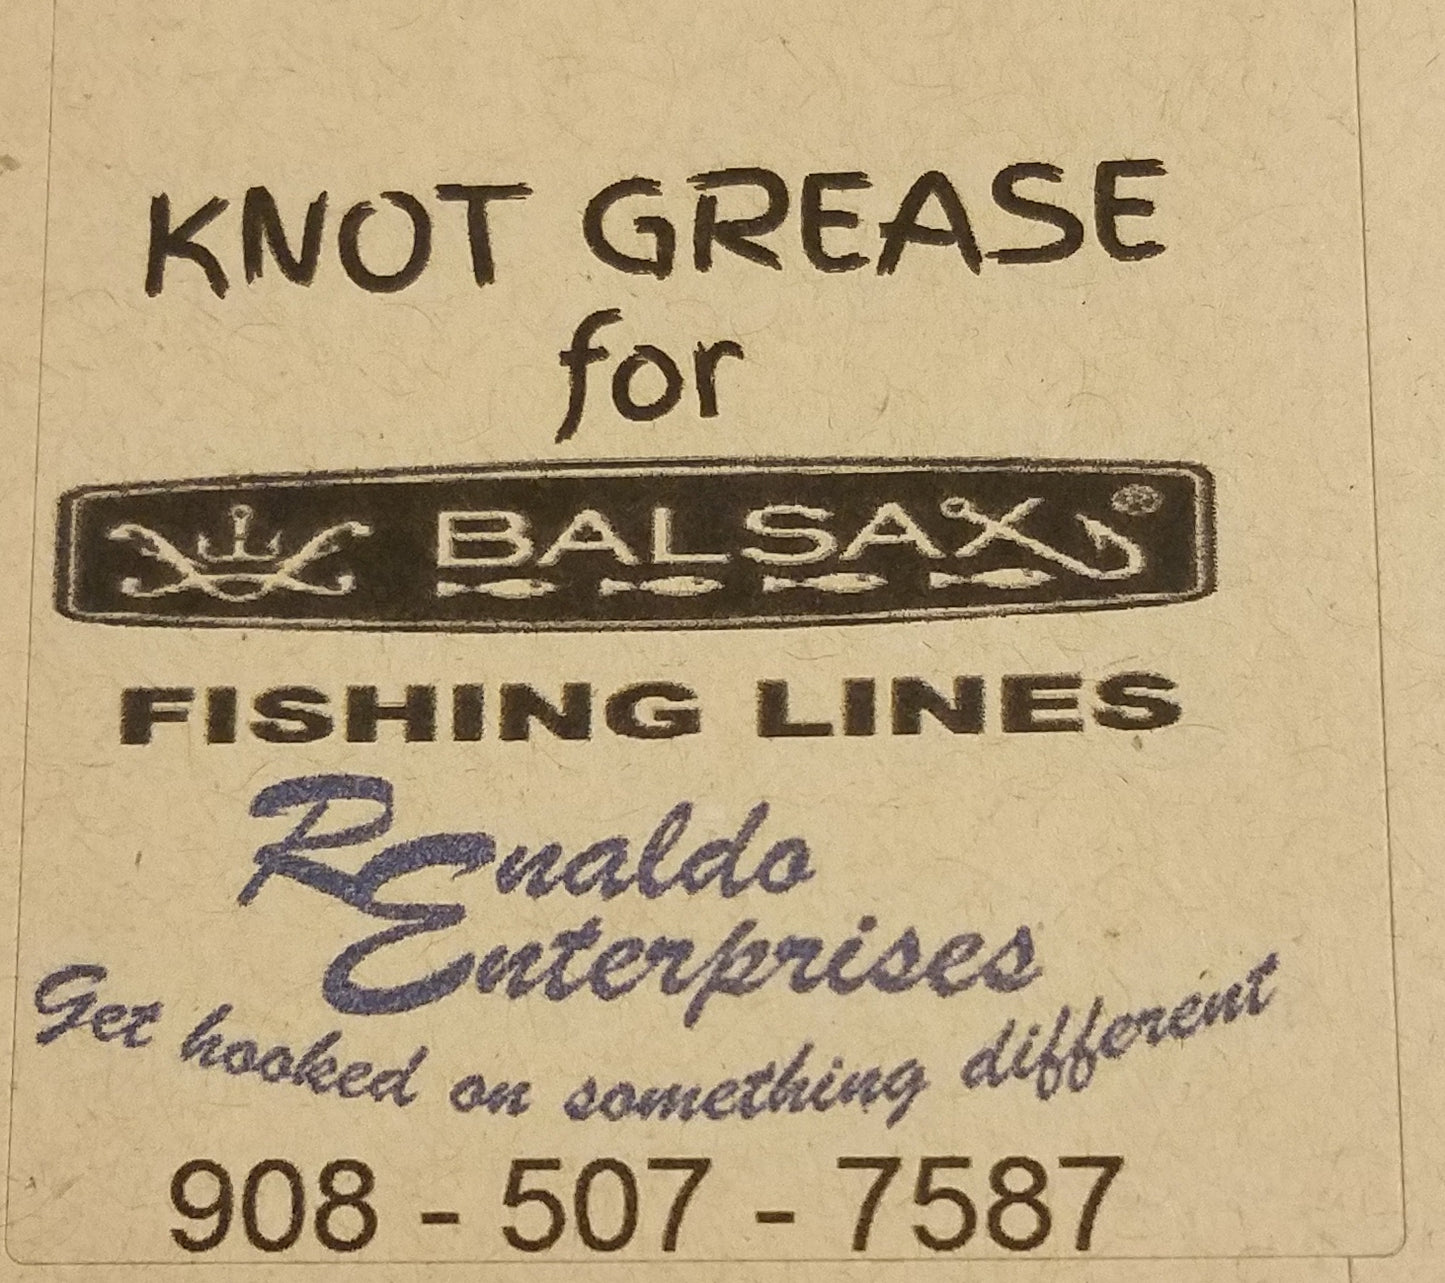 KNOT GREASE